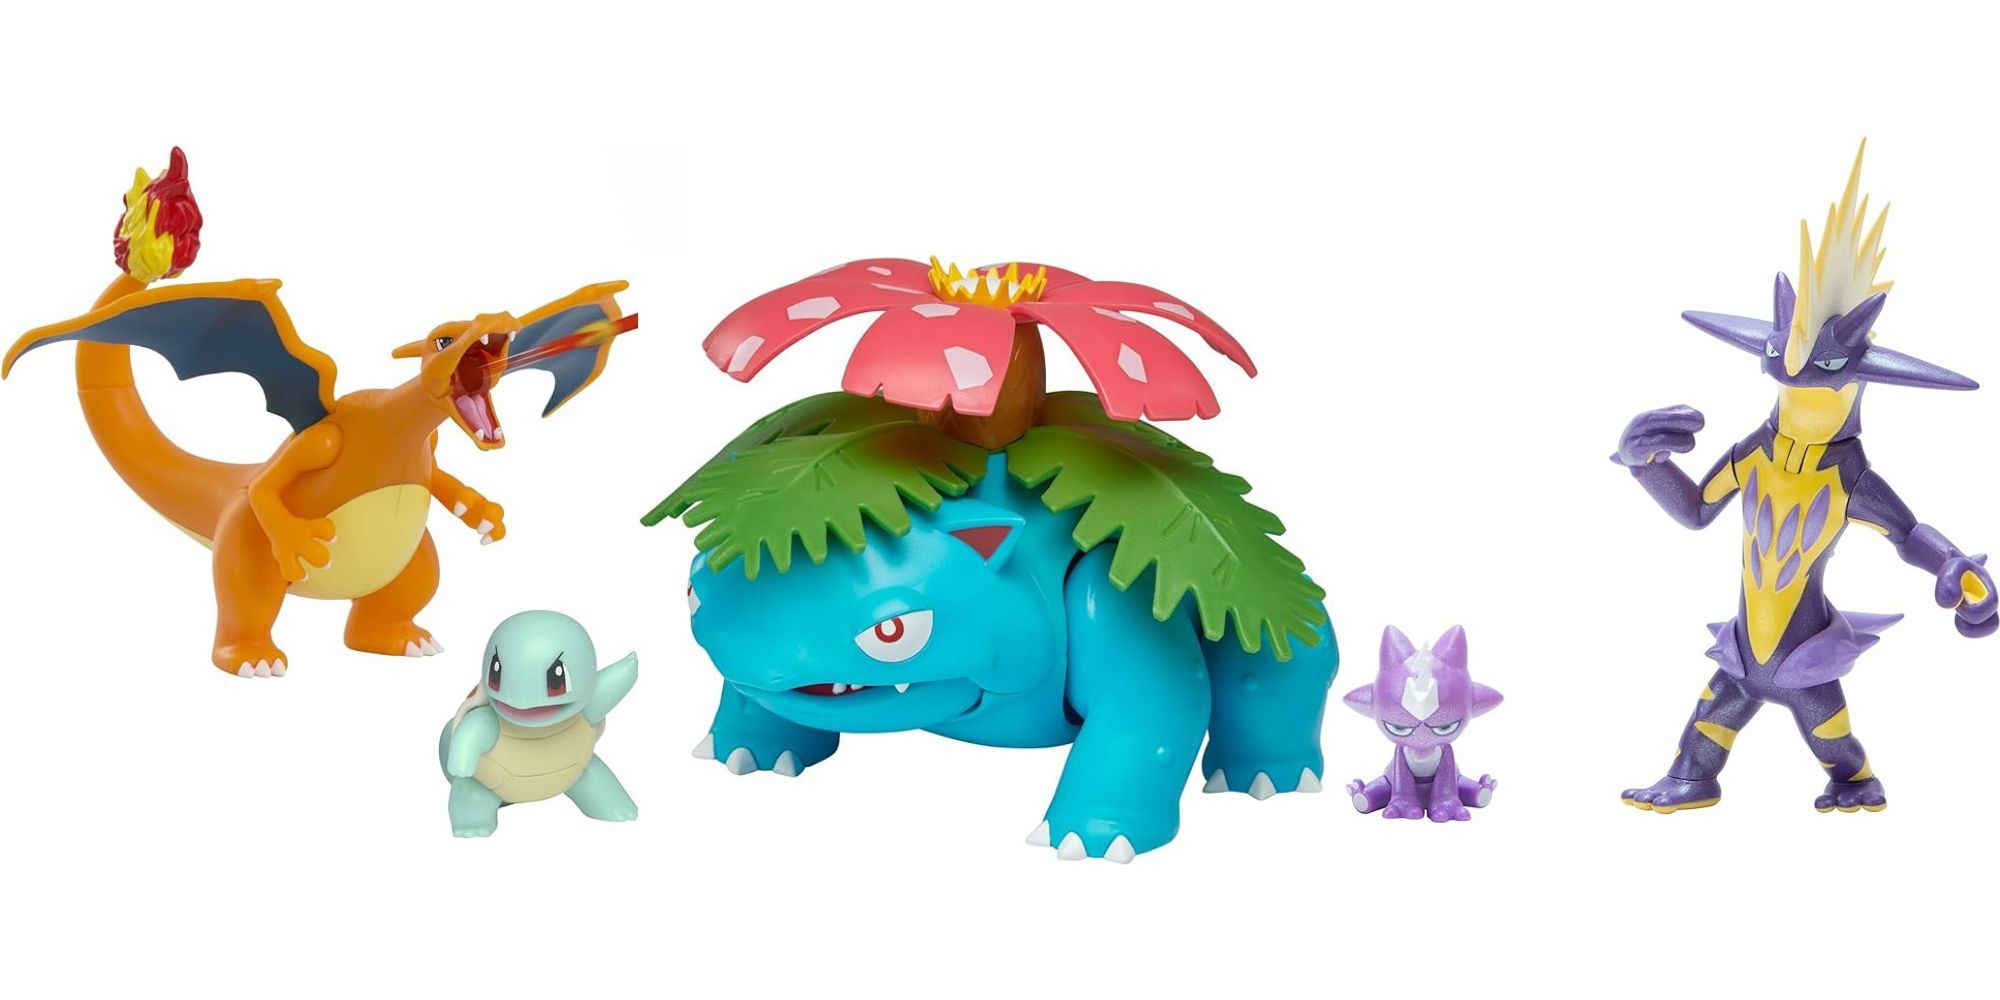 Pokemon Action Figures, Charizard and Squirtle, Venusaur Action Figure, Toxel and Toxtricity